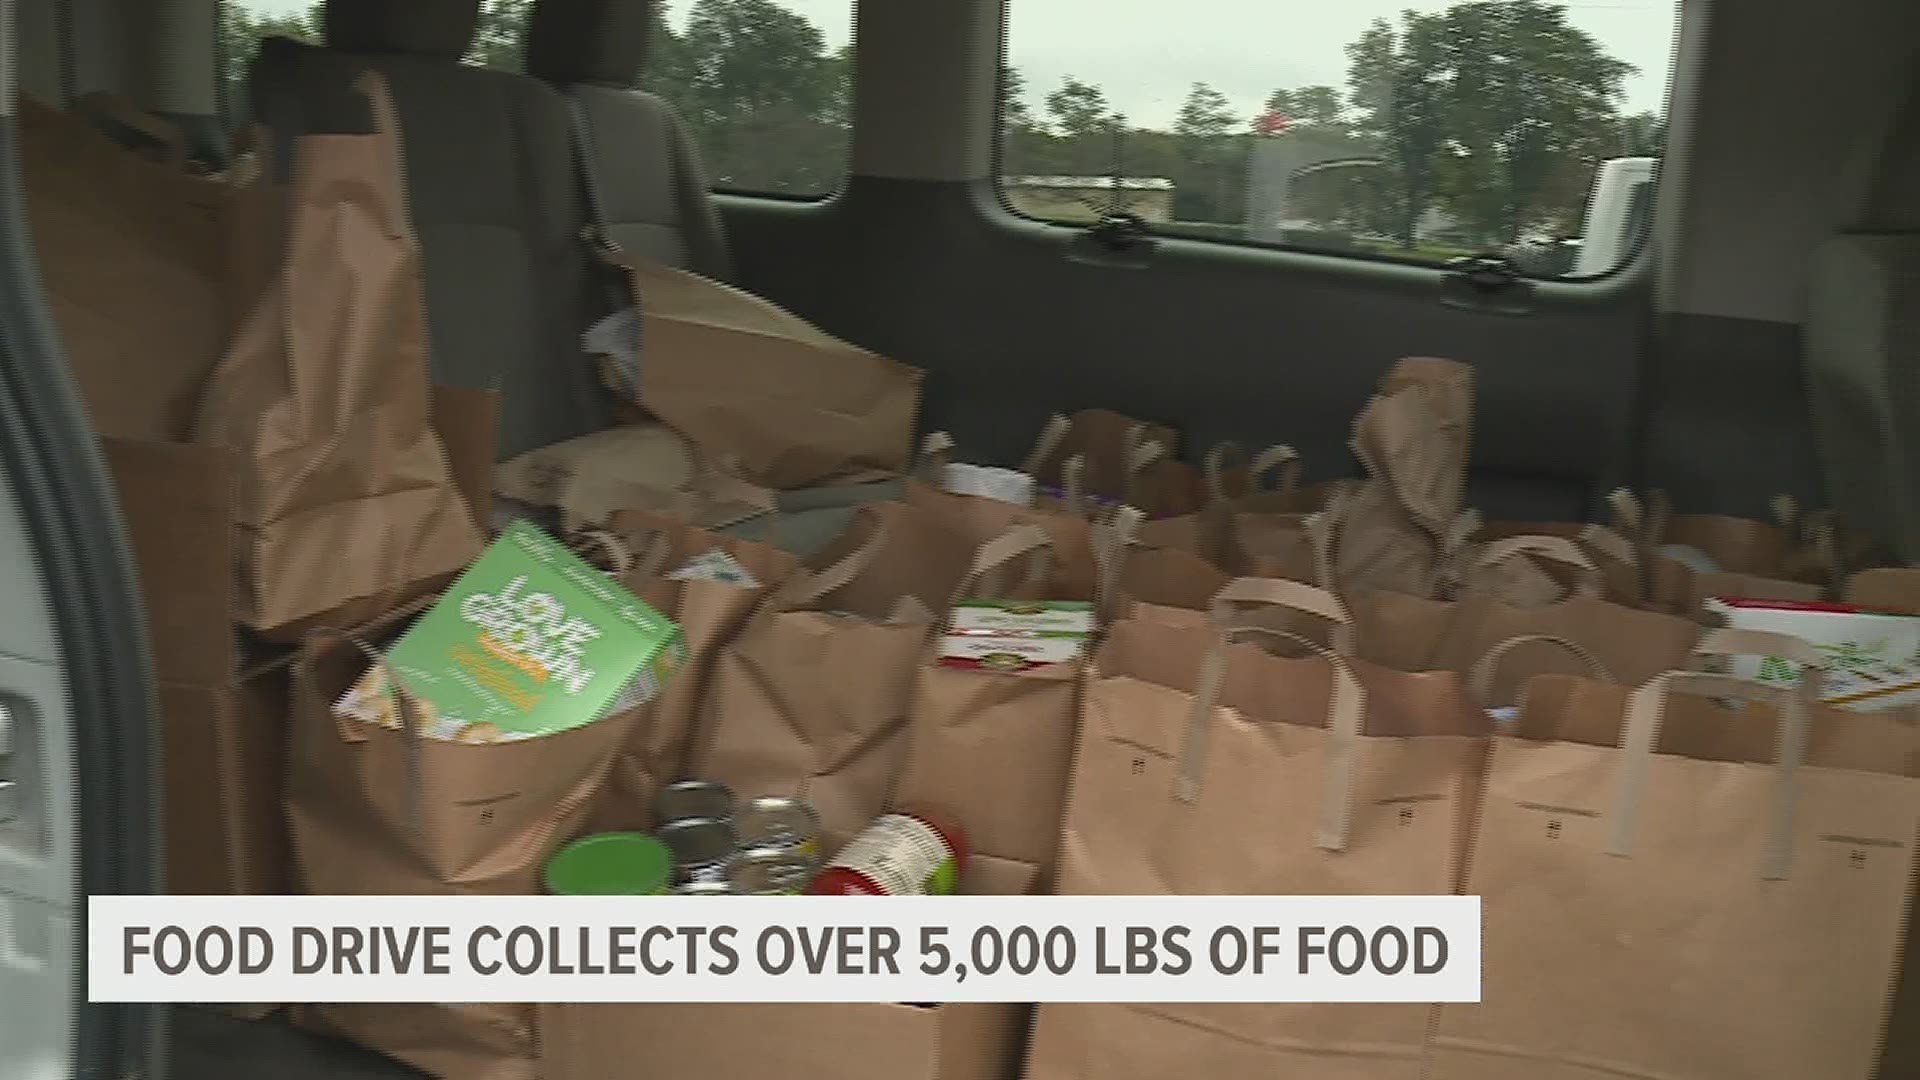 Over 5,000 lbs of food was collected over the weekend